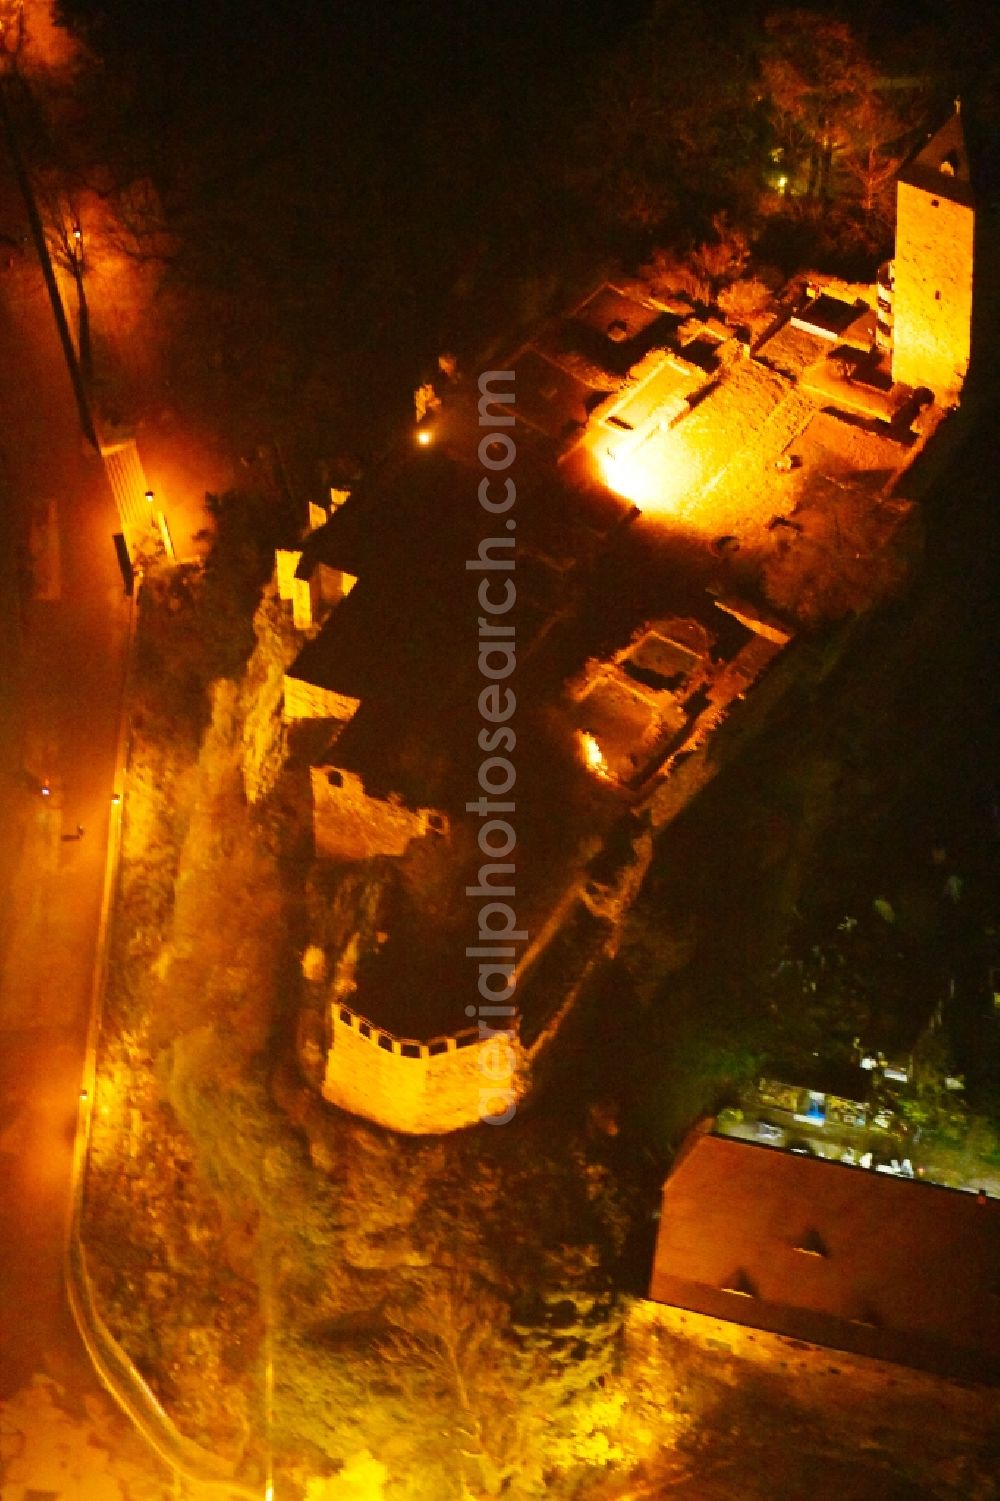 Aerial photograph at night Halle (Saale) - Night lighting Ruins and vestiges of the former castle and fortress Burg Giebichenstein on Seebener Strasse in Halle (Saale) in the state Saxony-Anhalt